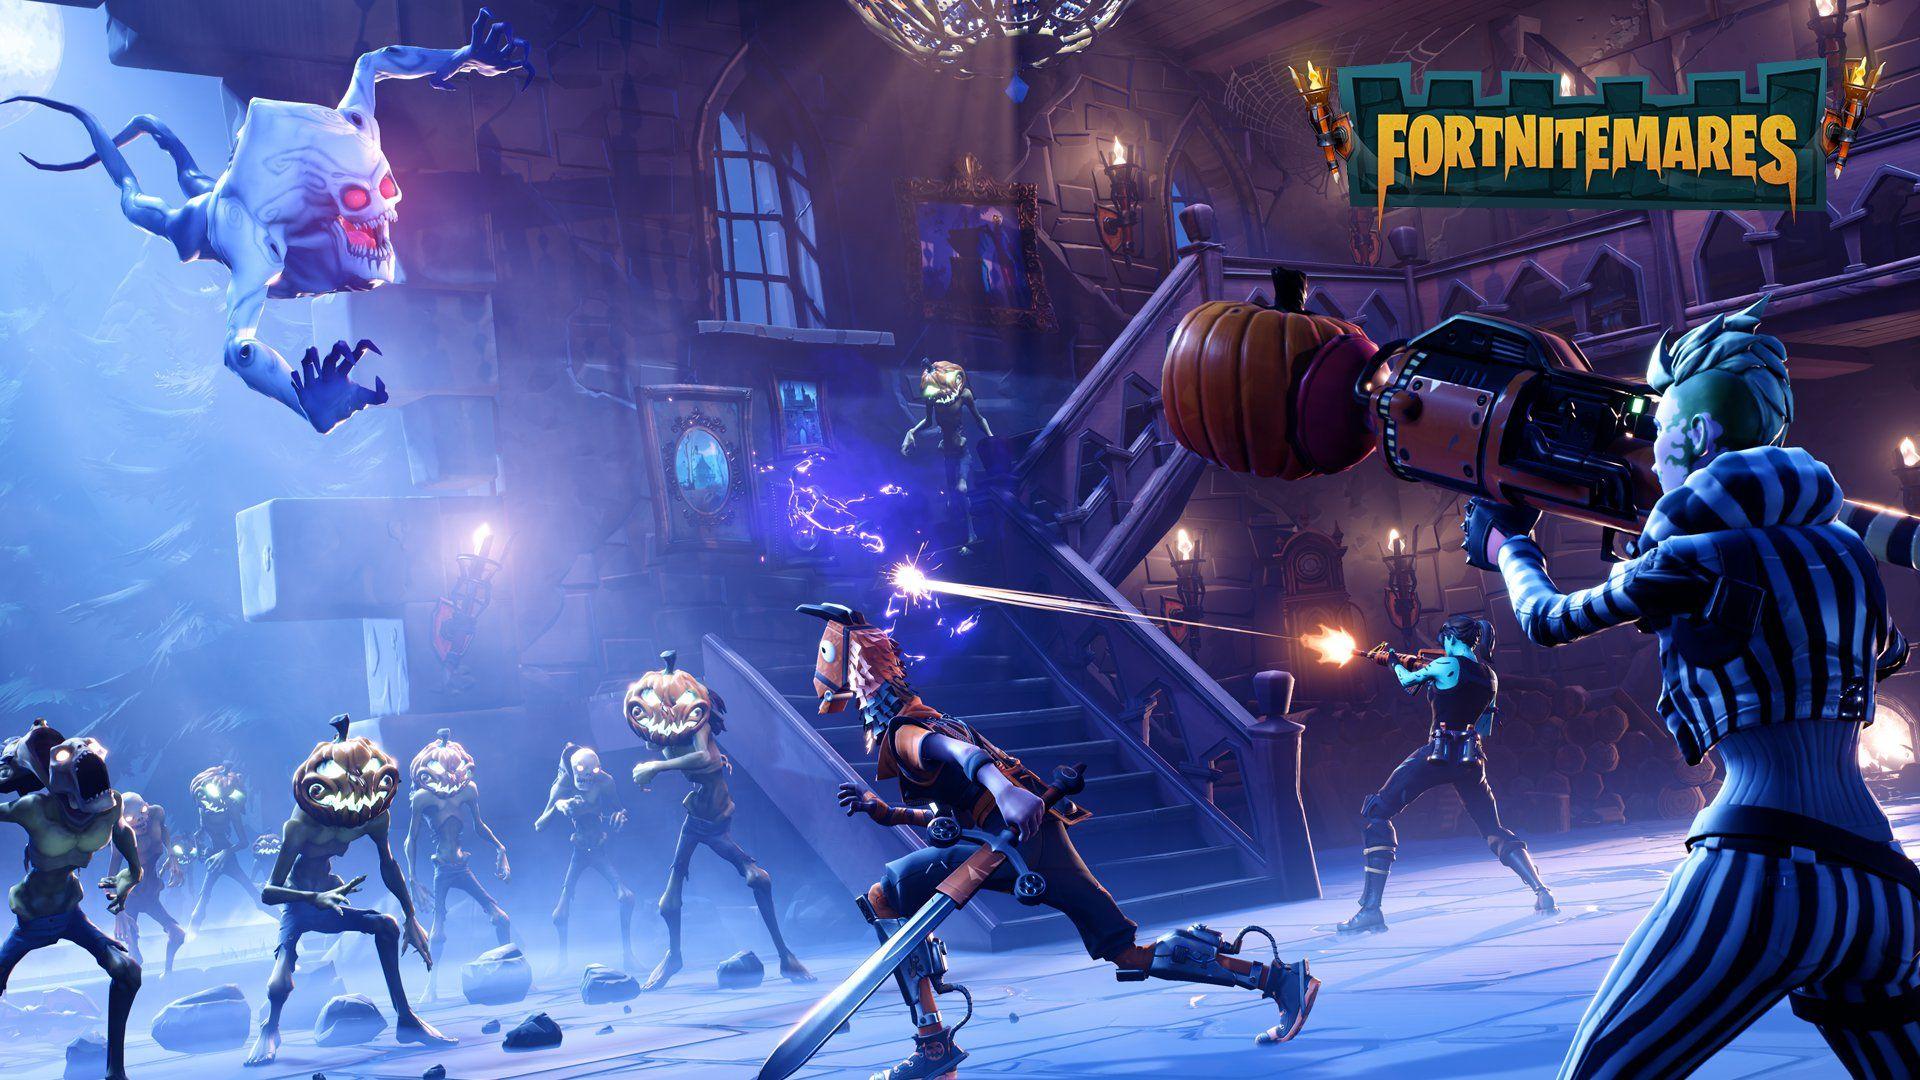 Cool Fortnite Logo - Fortnite's New Update is Cool, but it Doesn't Fix Loot Boxes